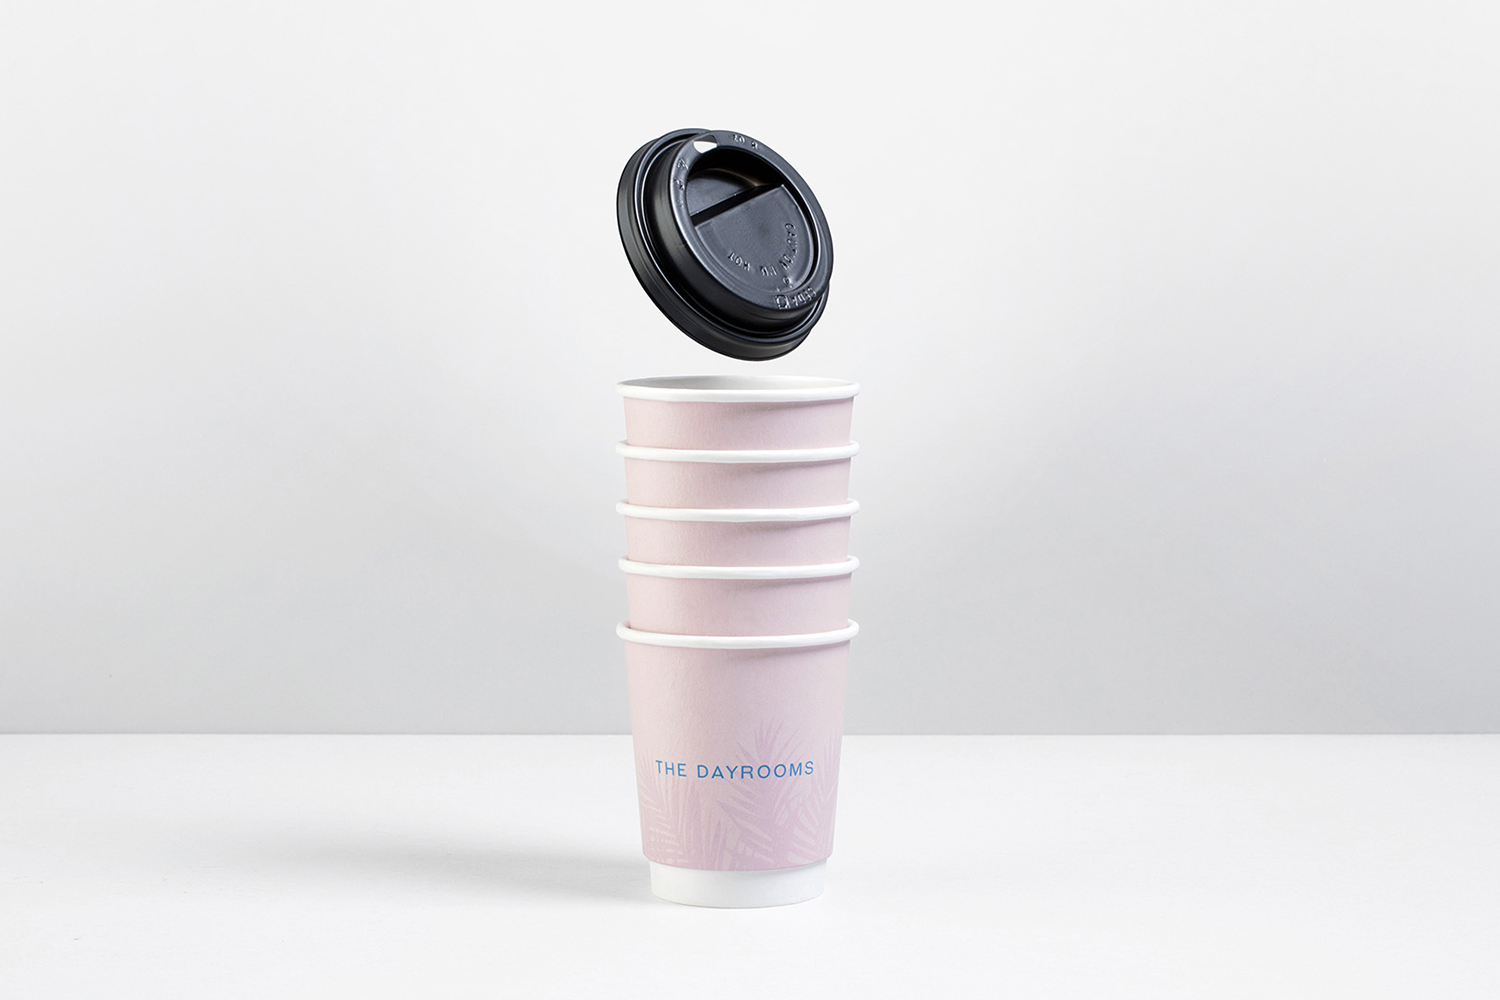 Branded coffee cups for The Dayrooms Cafe designed by Two Times Elliott